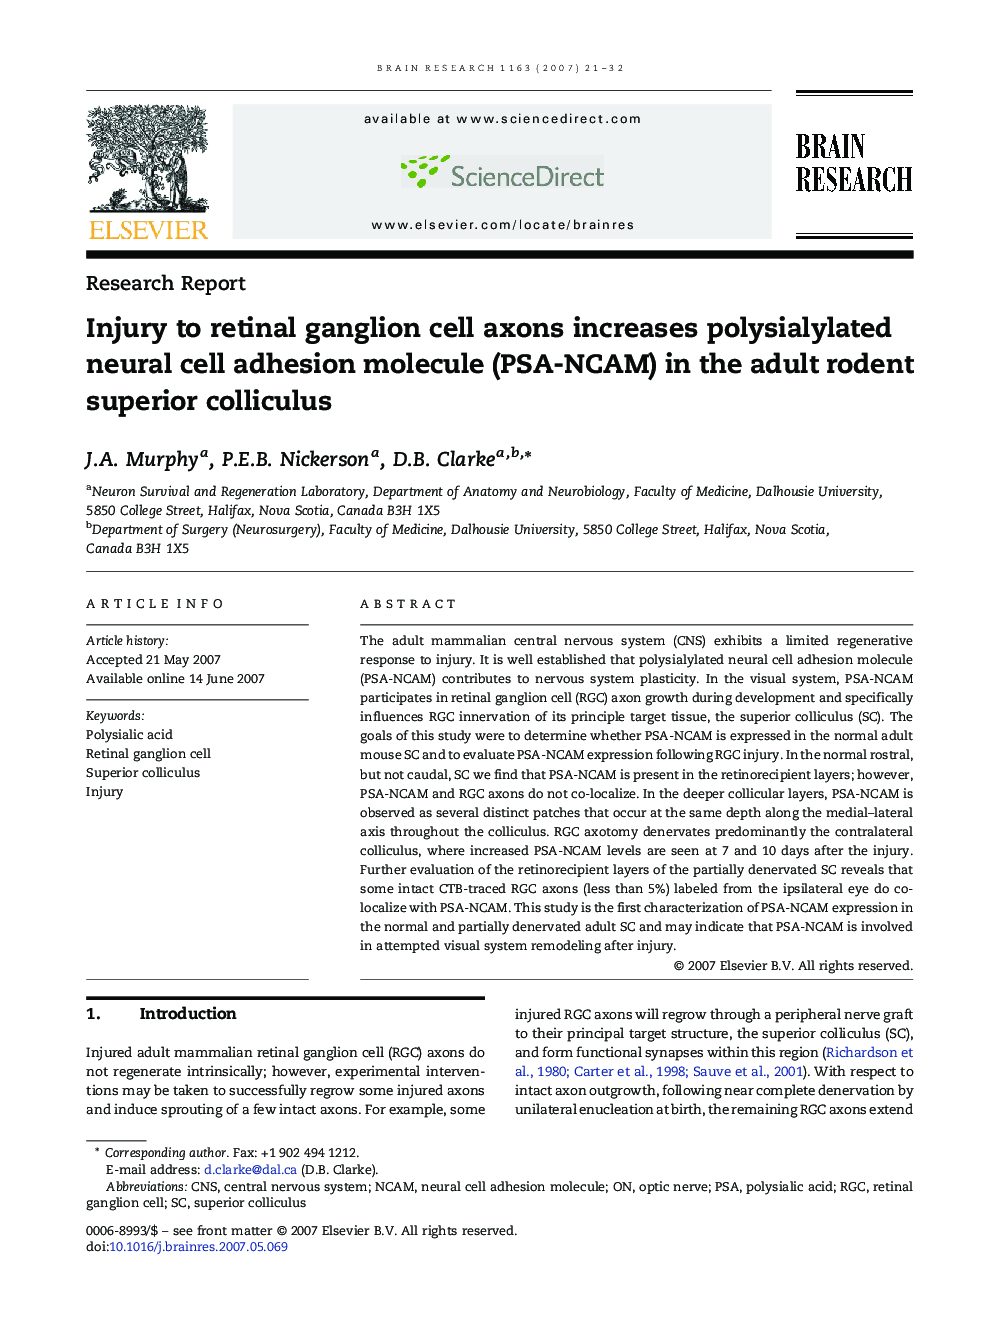 Injury to retinal ganglion cell axons increases polysialylated neural cell adhesion molecule (PSA-NCAM) in the adult rodent superior colliculus